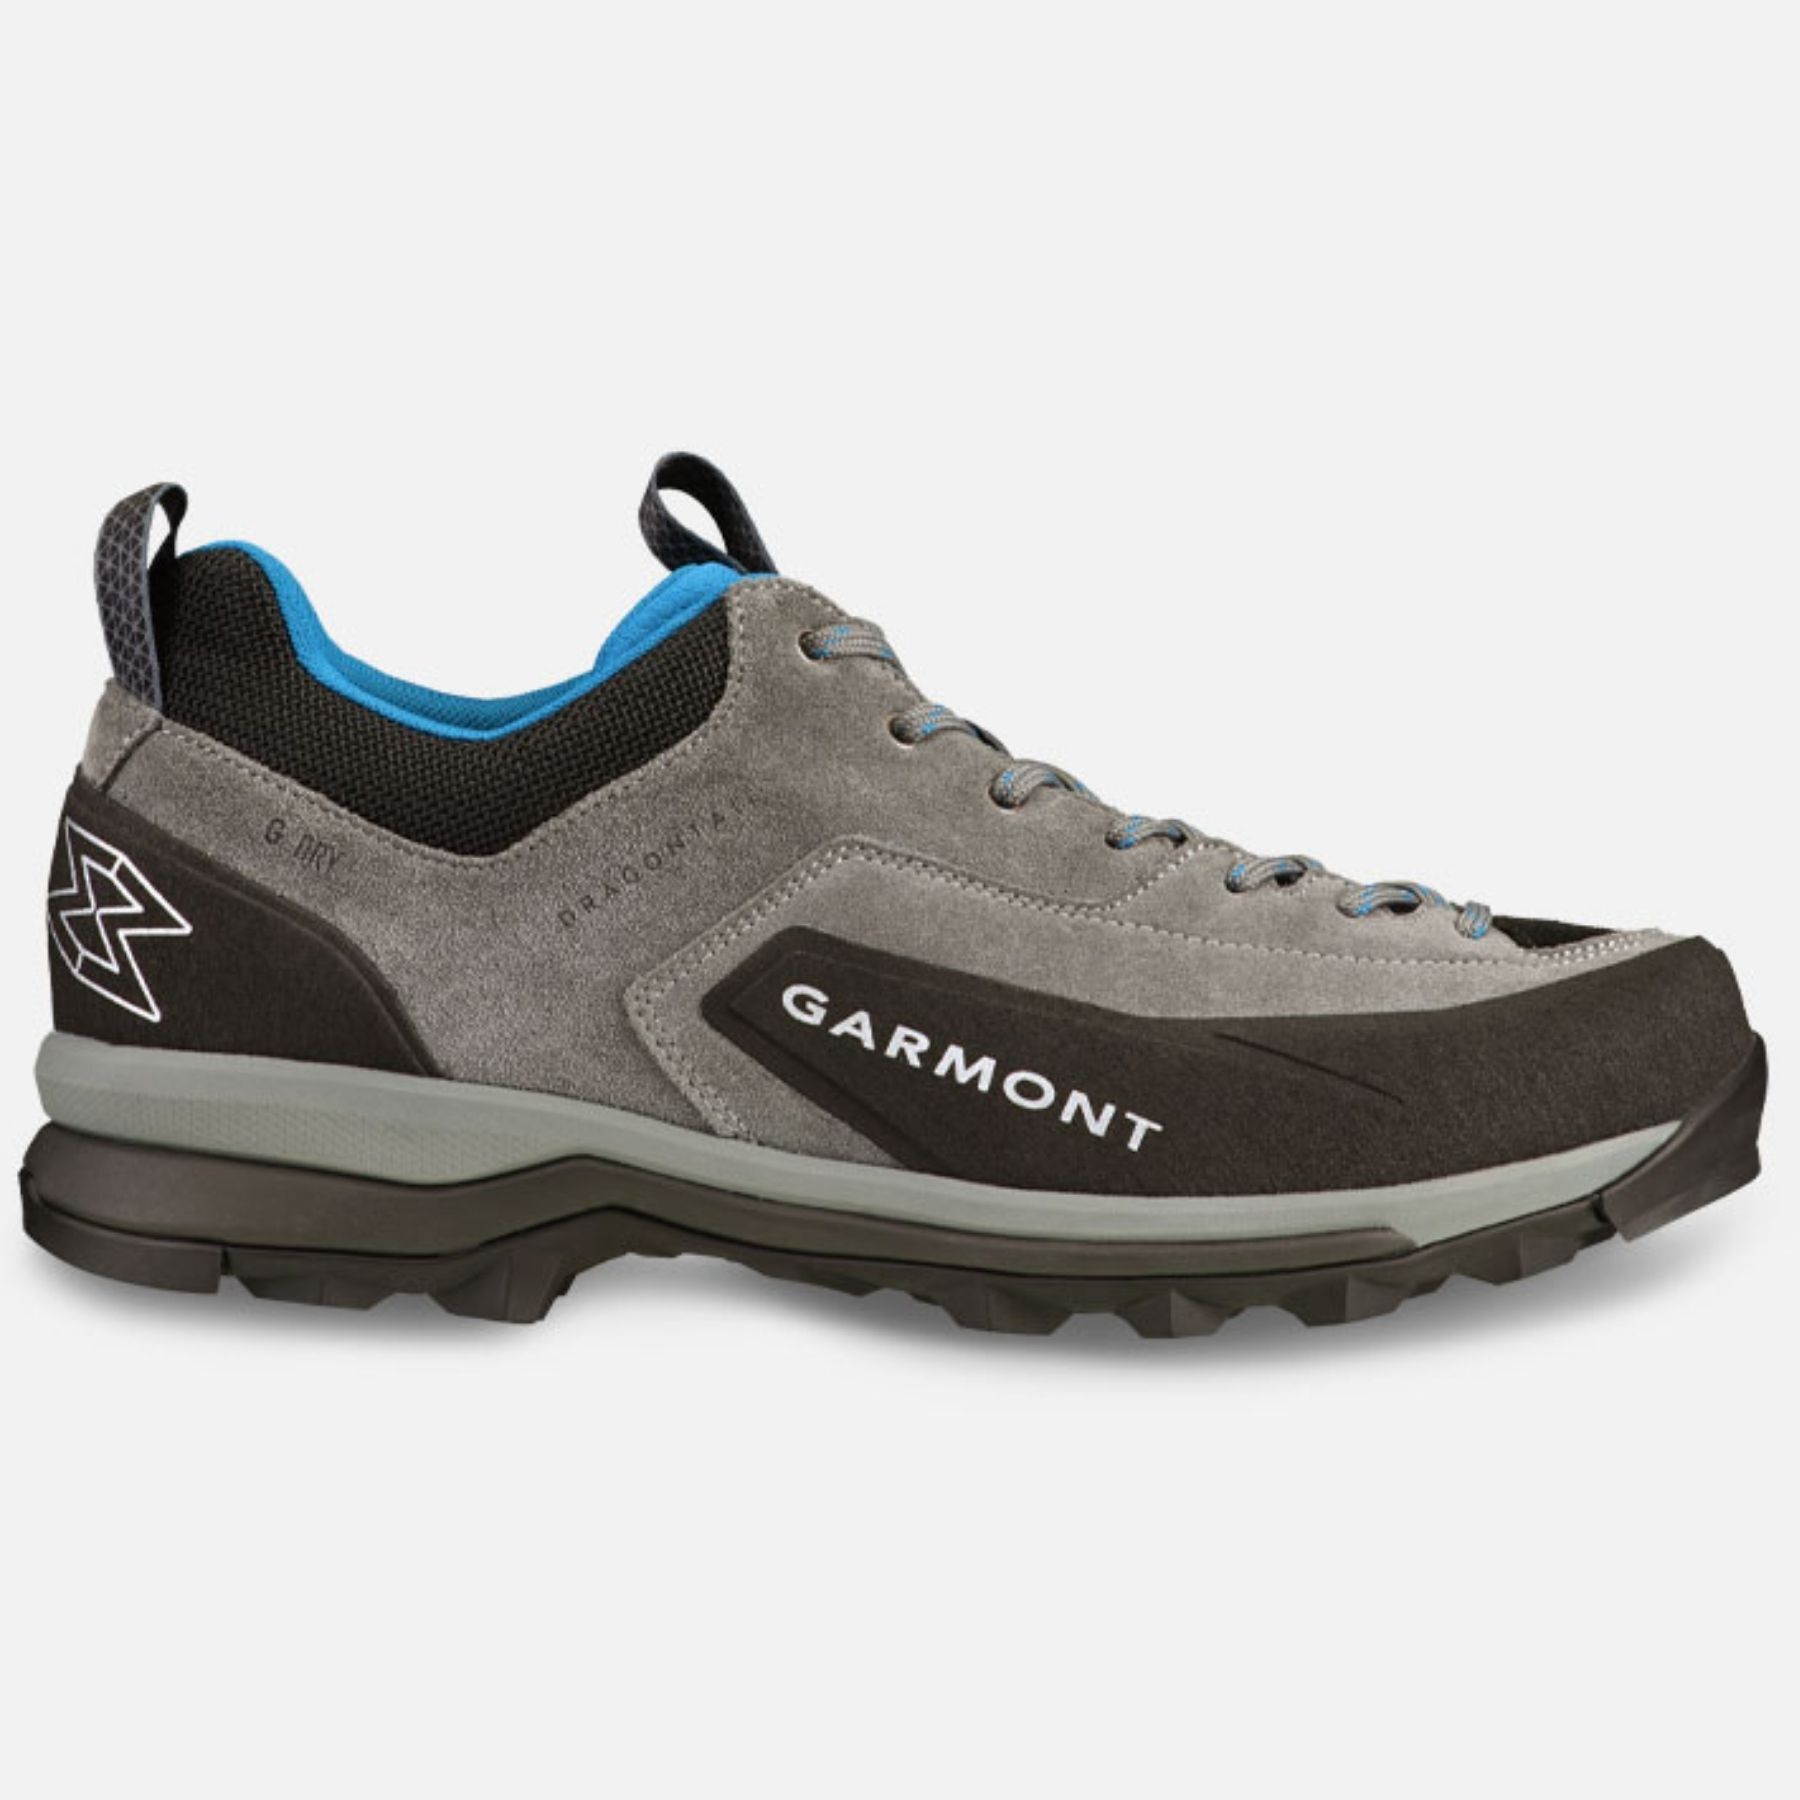 Garmont Dragontail G Dry - Approach shoes - Women's